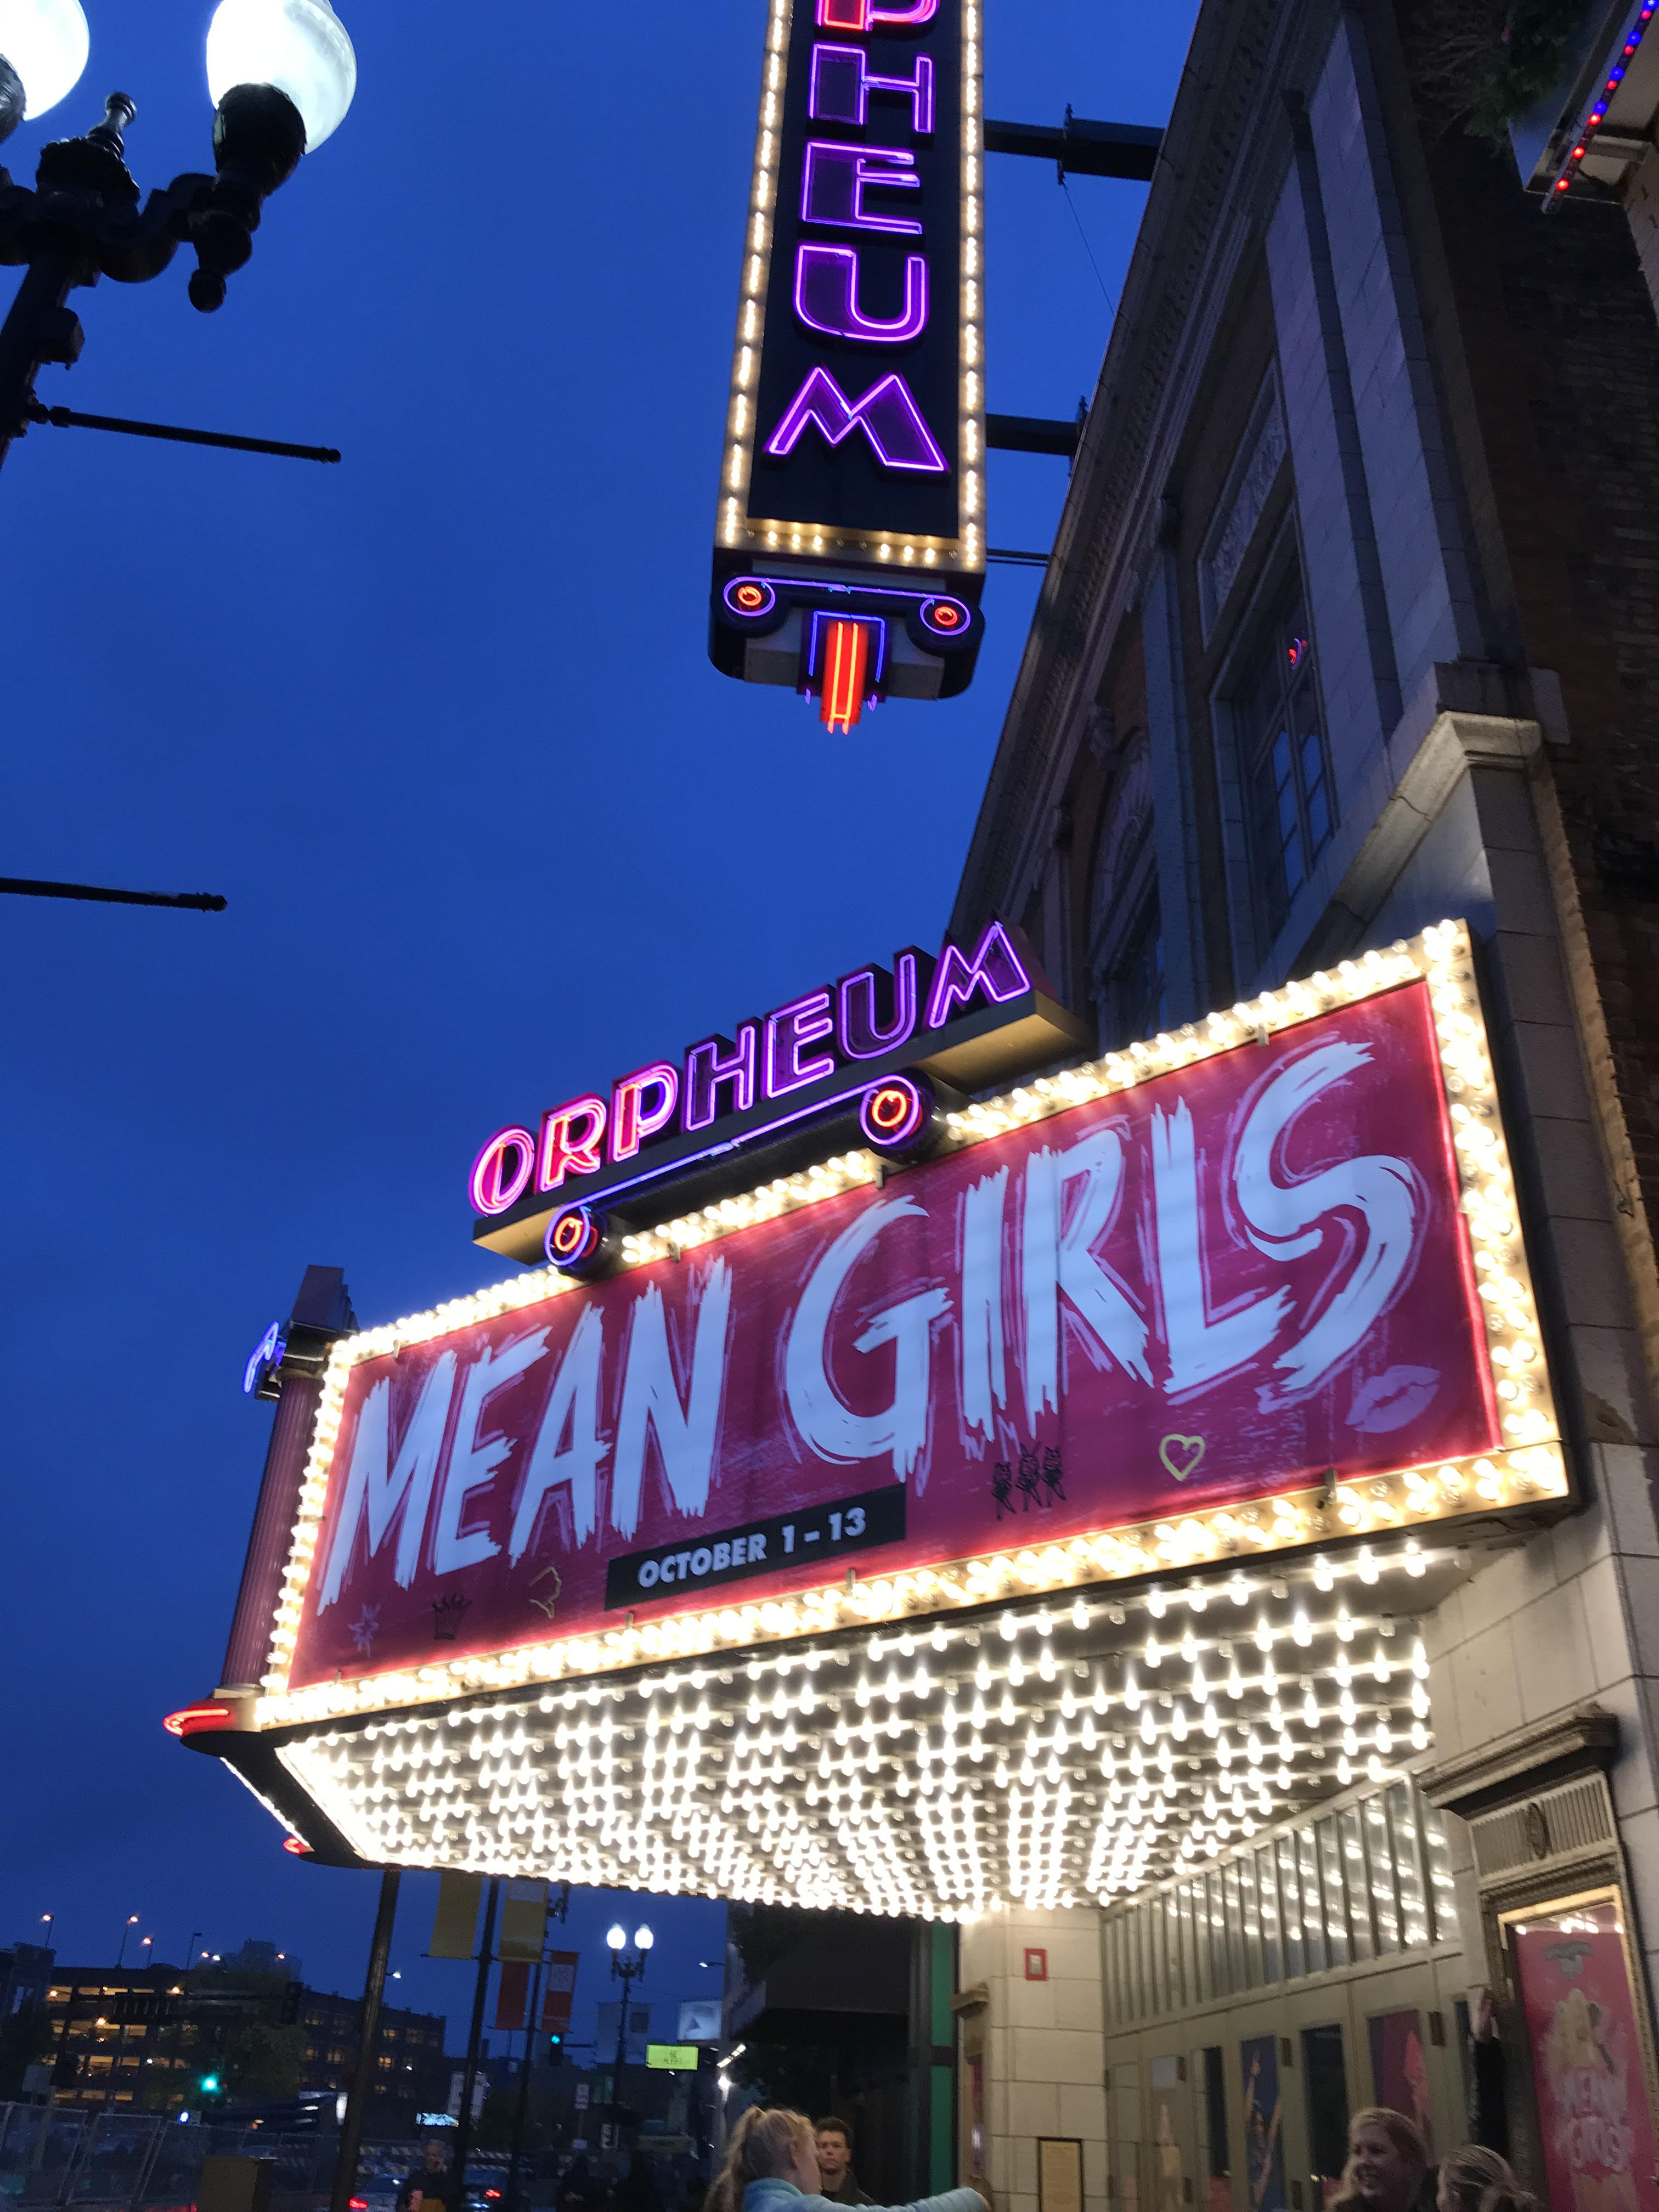 The marquee display for the “Mean Girls” play at the Orpheum Theater in downtown Minneapolis.